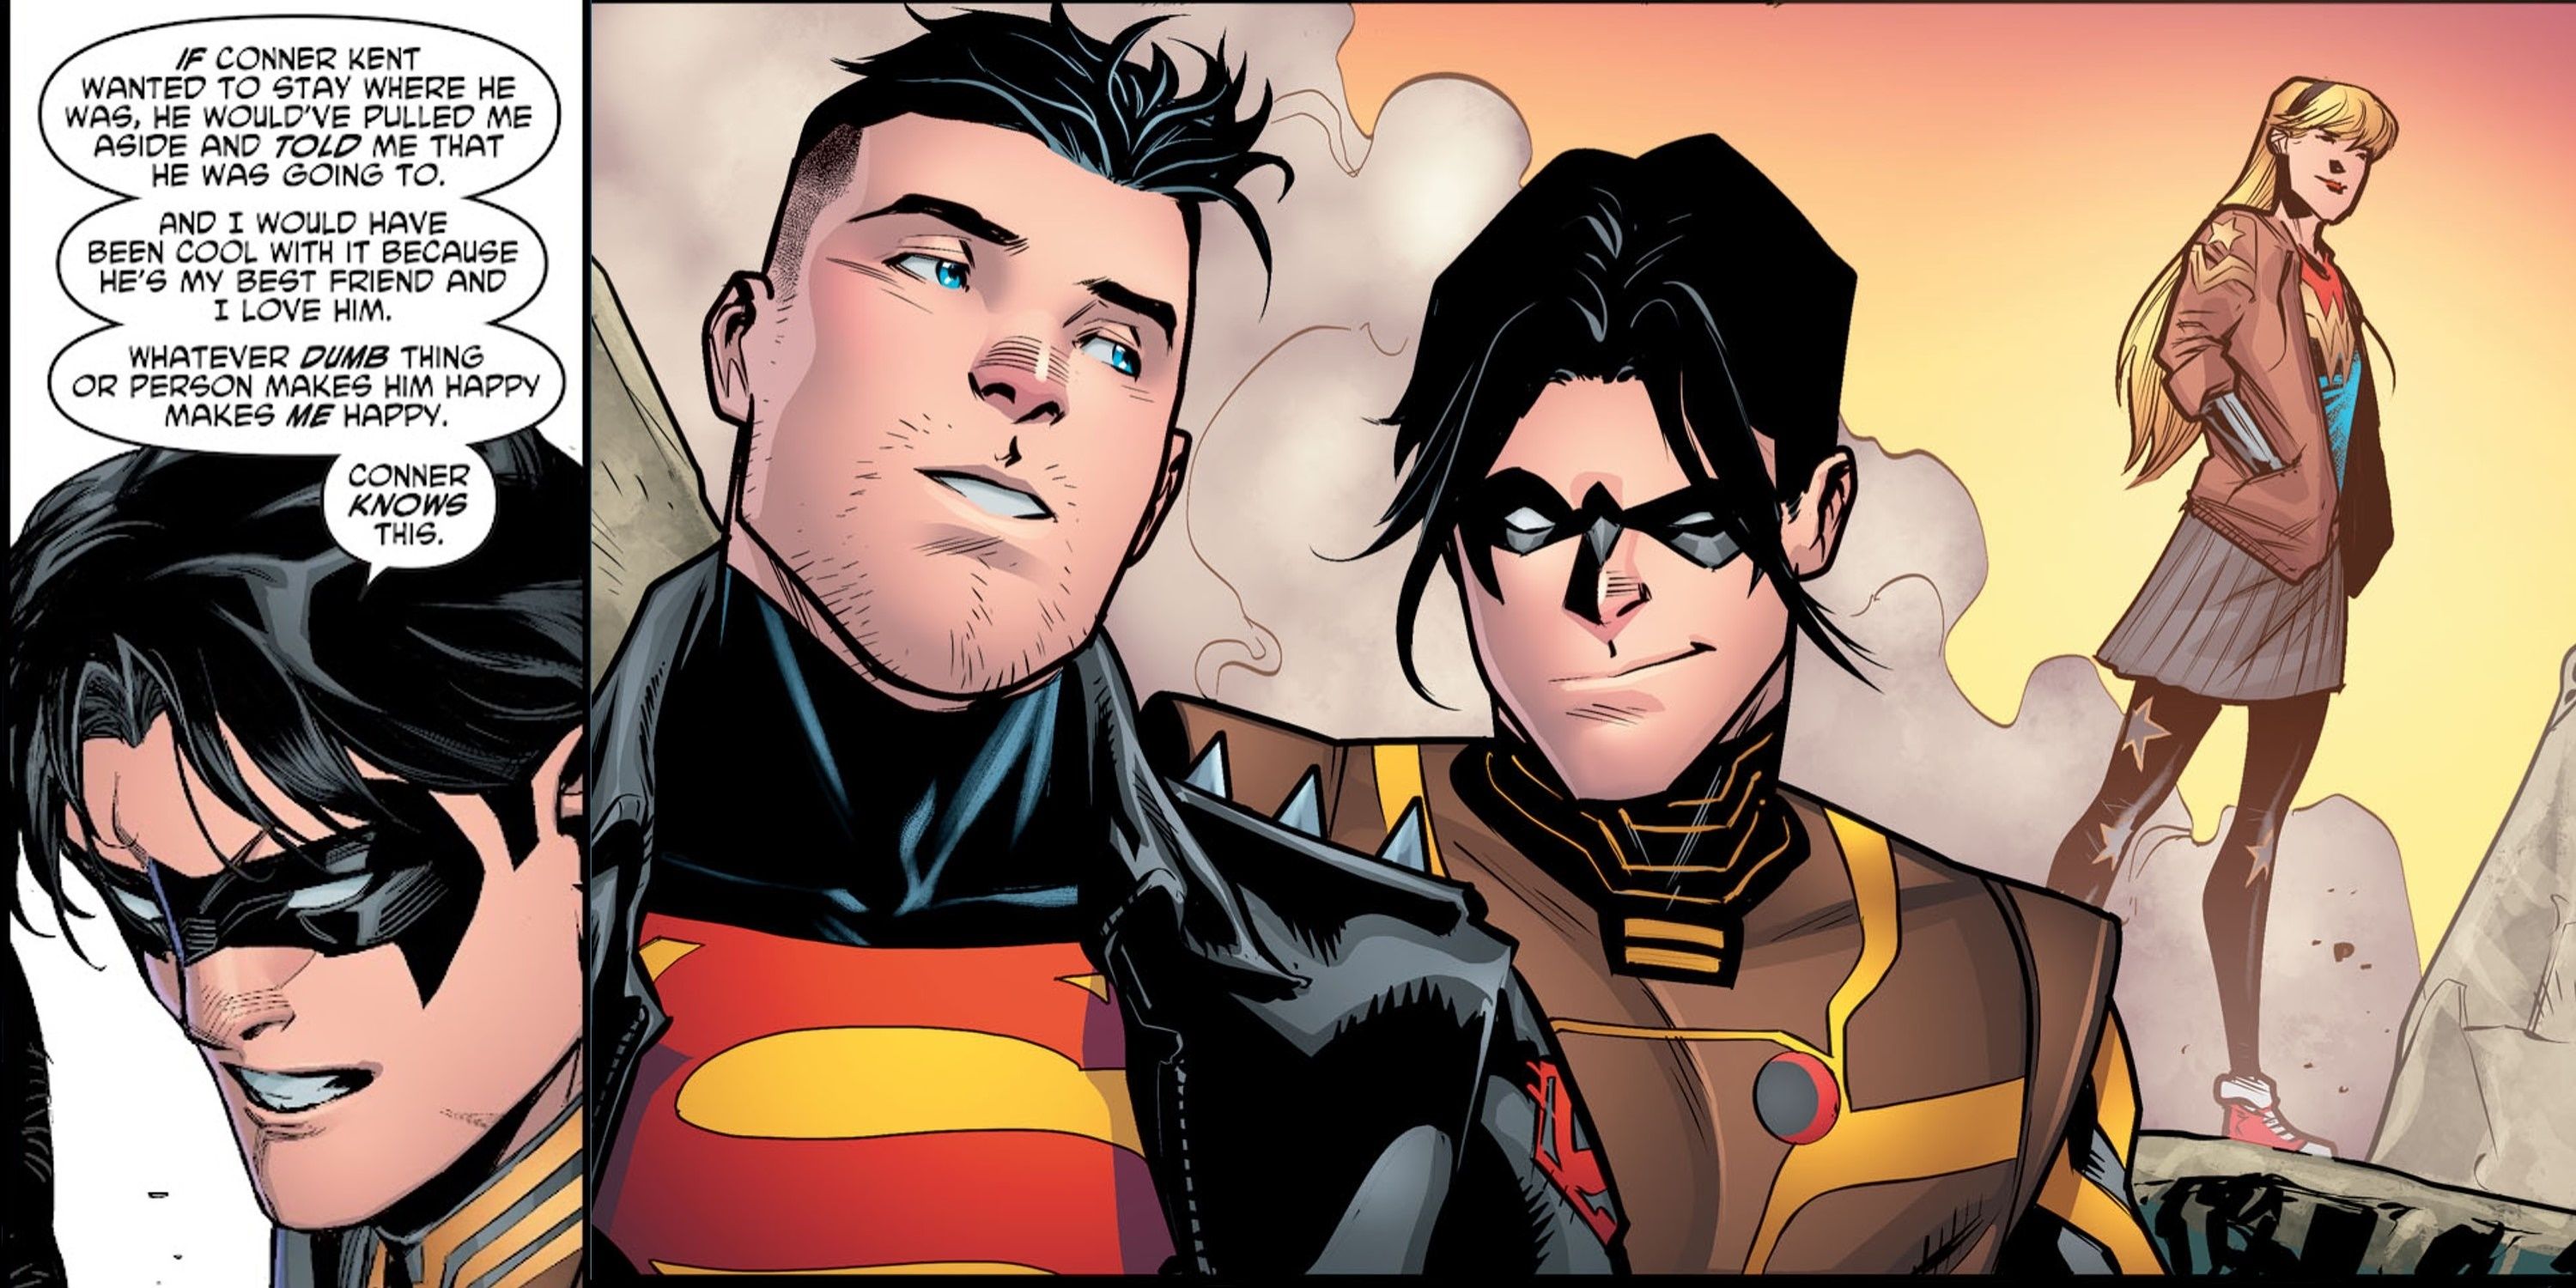 Tim Drake shows Conner Kent love and support DC Comics Young Justice